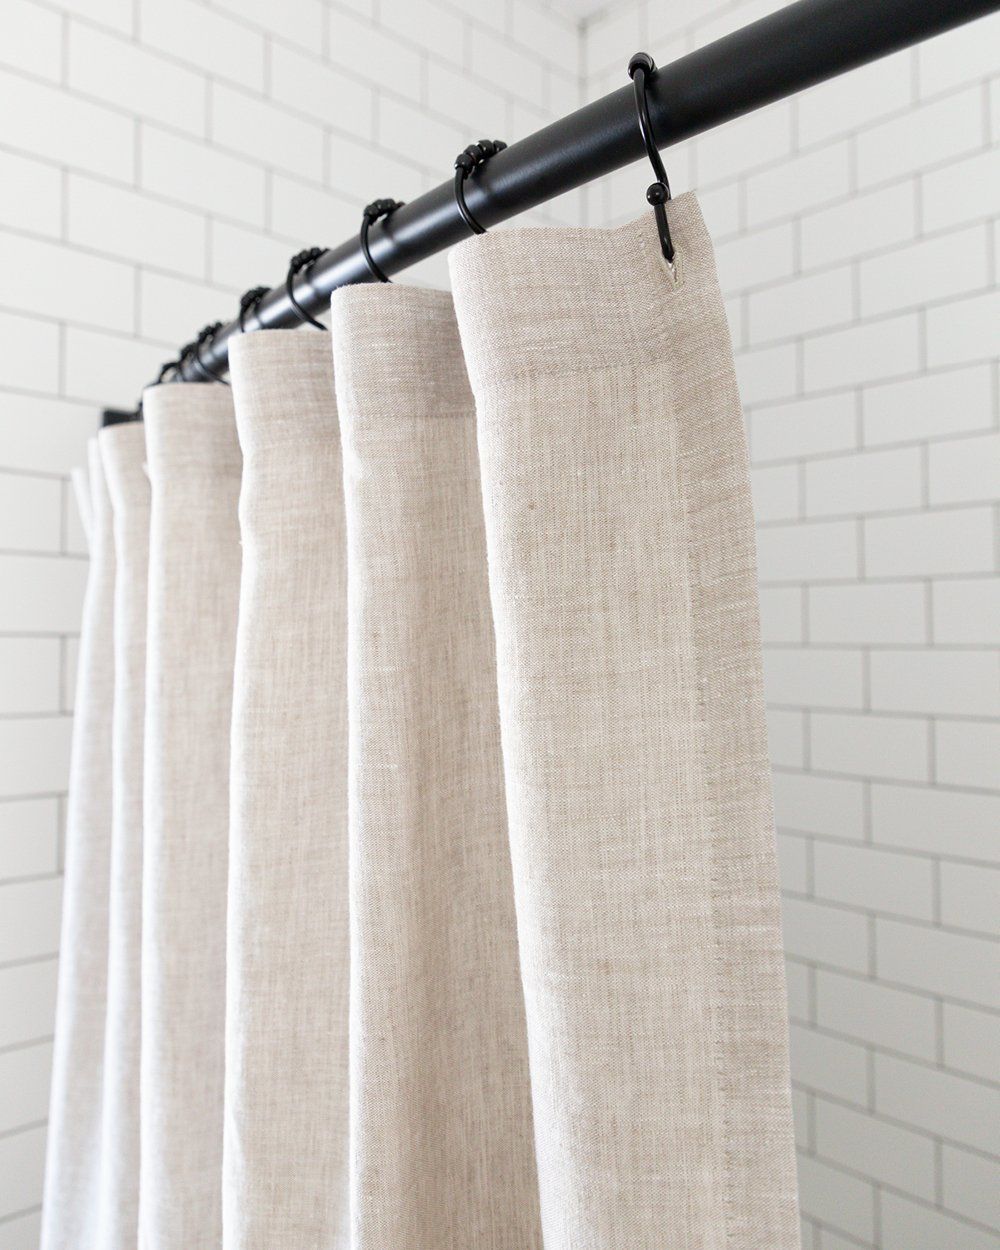 Bathroom Curtains: Adding Style and Privacy to Your Space